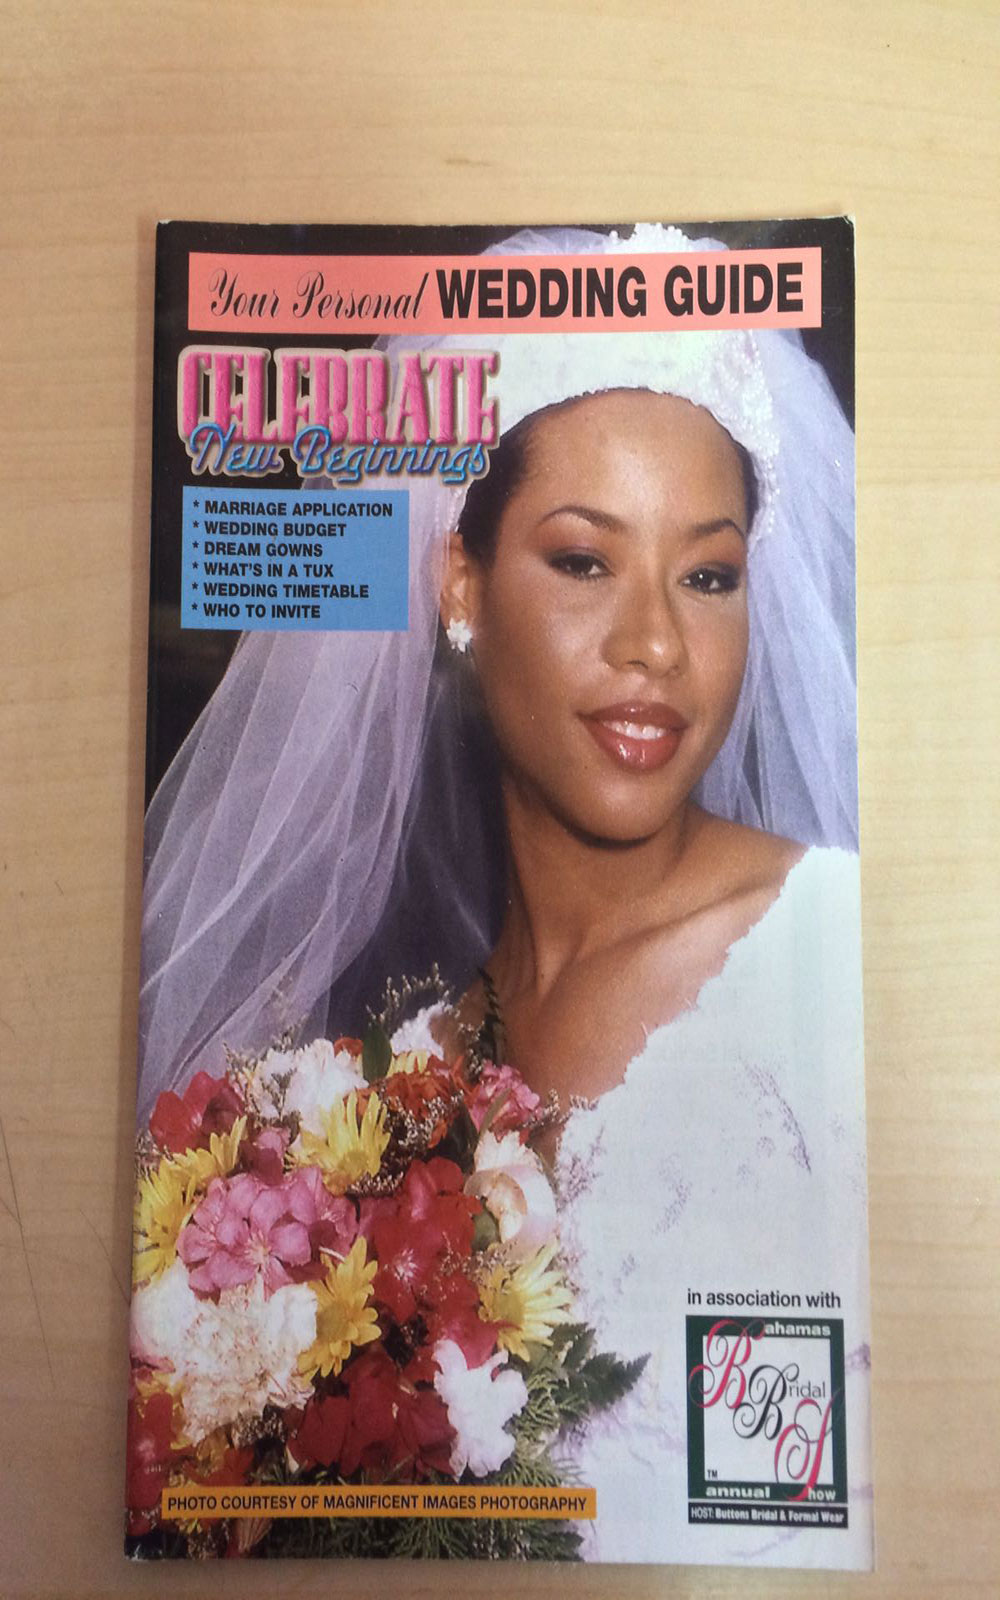 The Wedding Guide 2000-2001